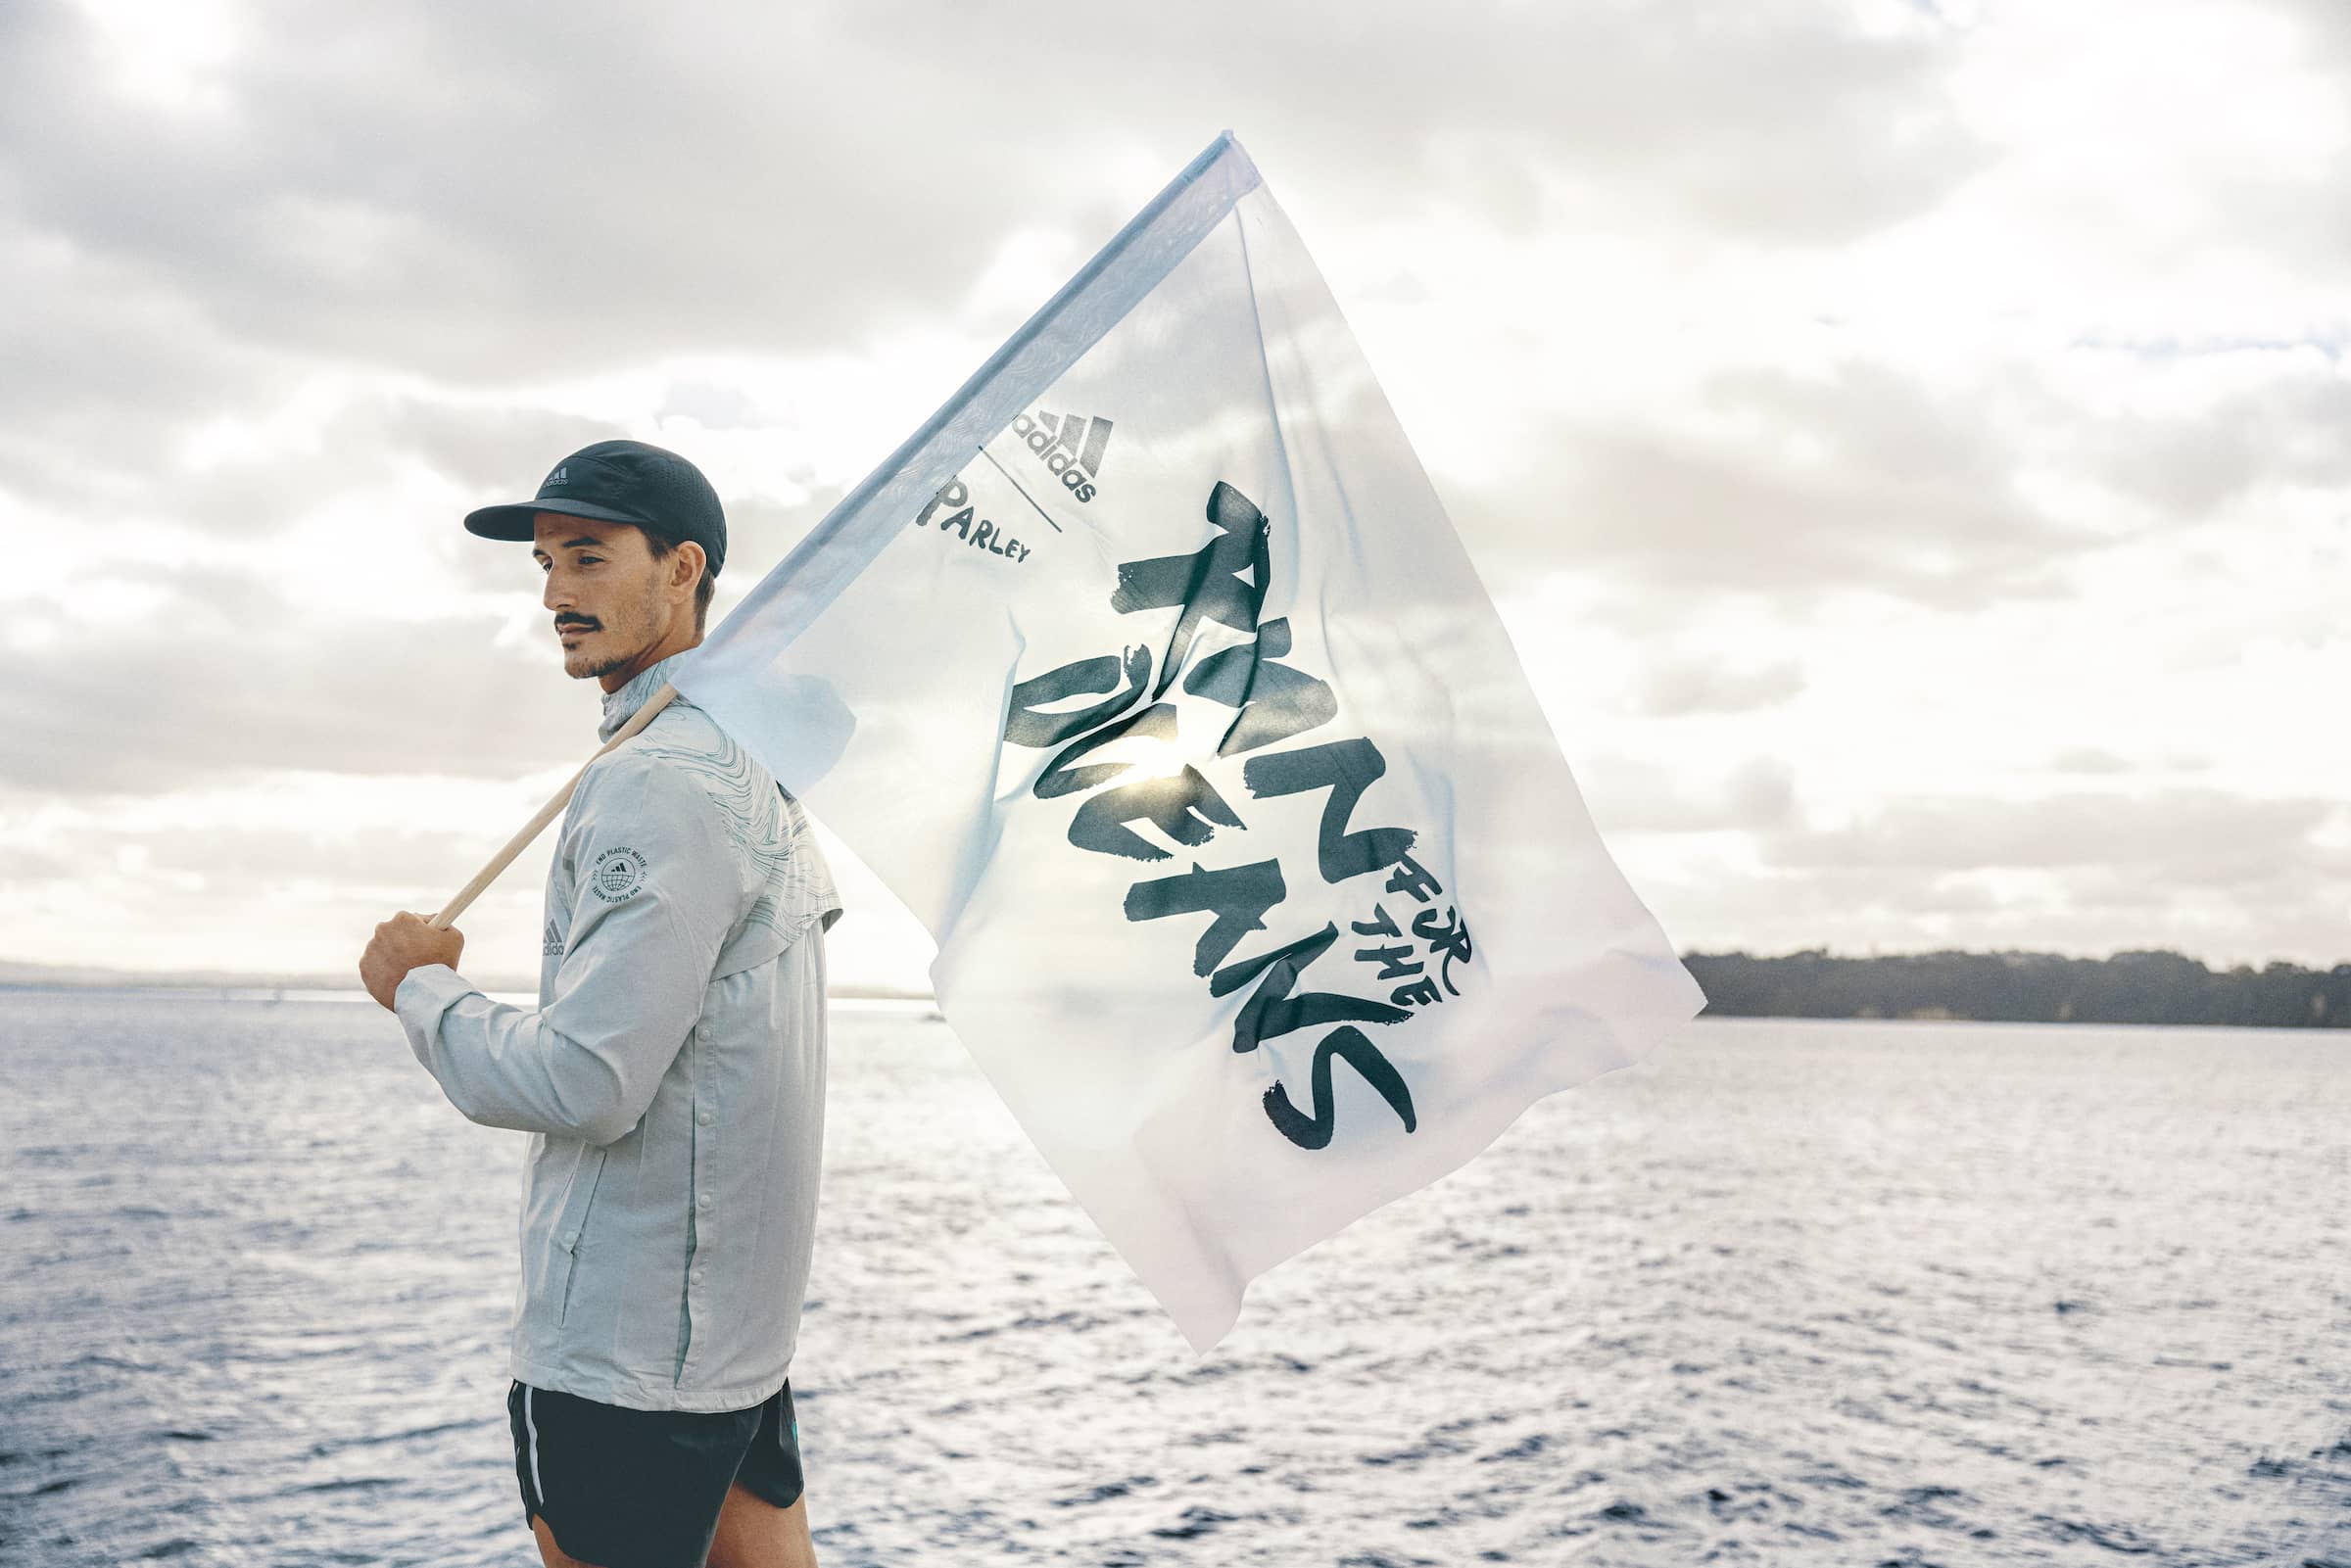 A man bearing the parley oceans flag